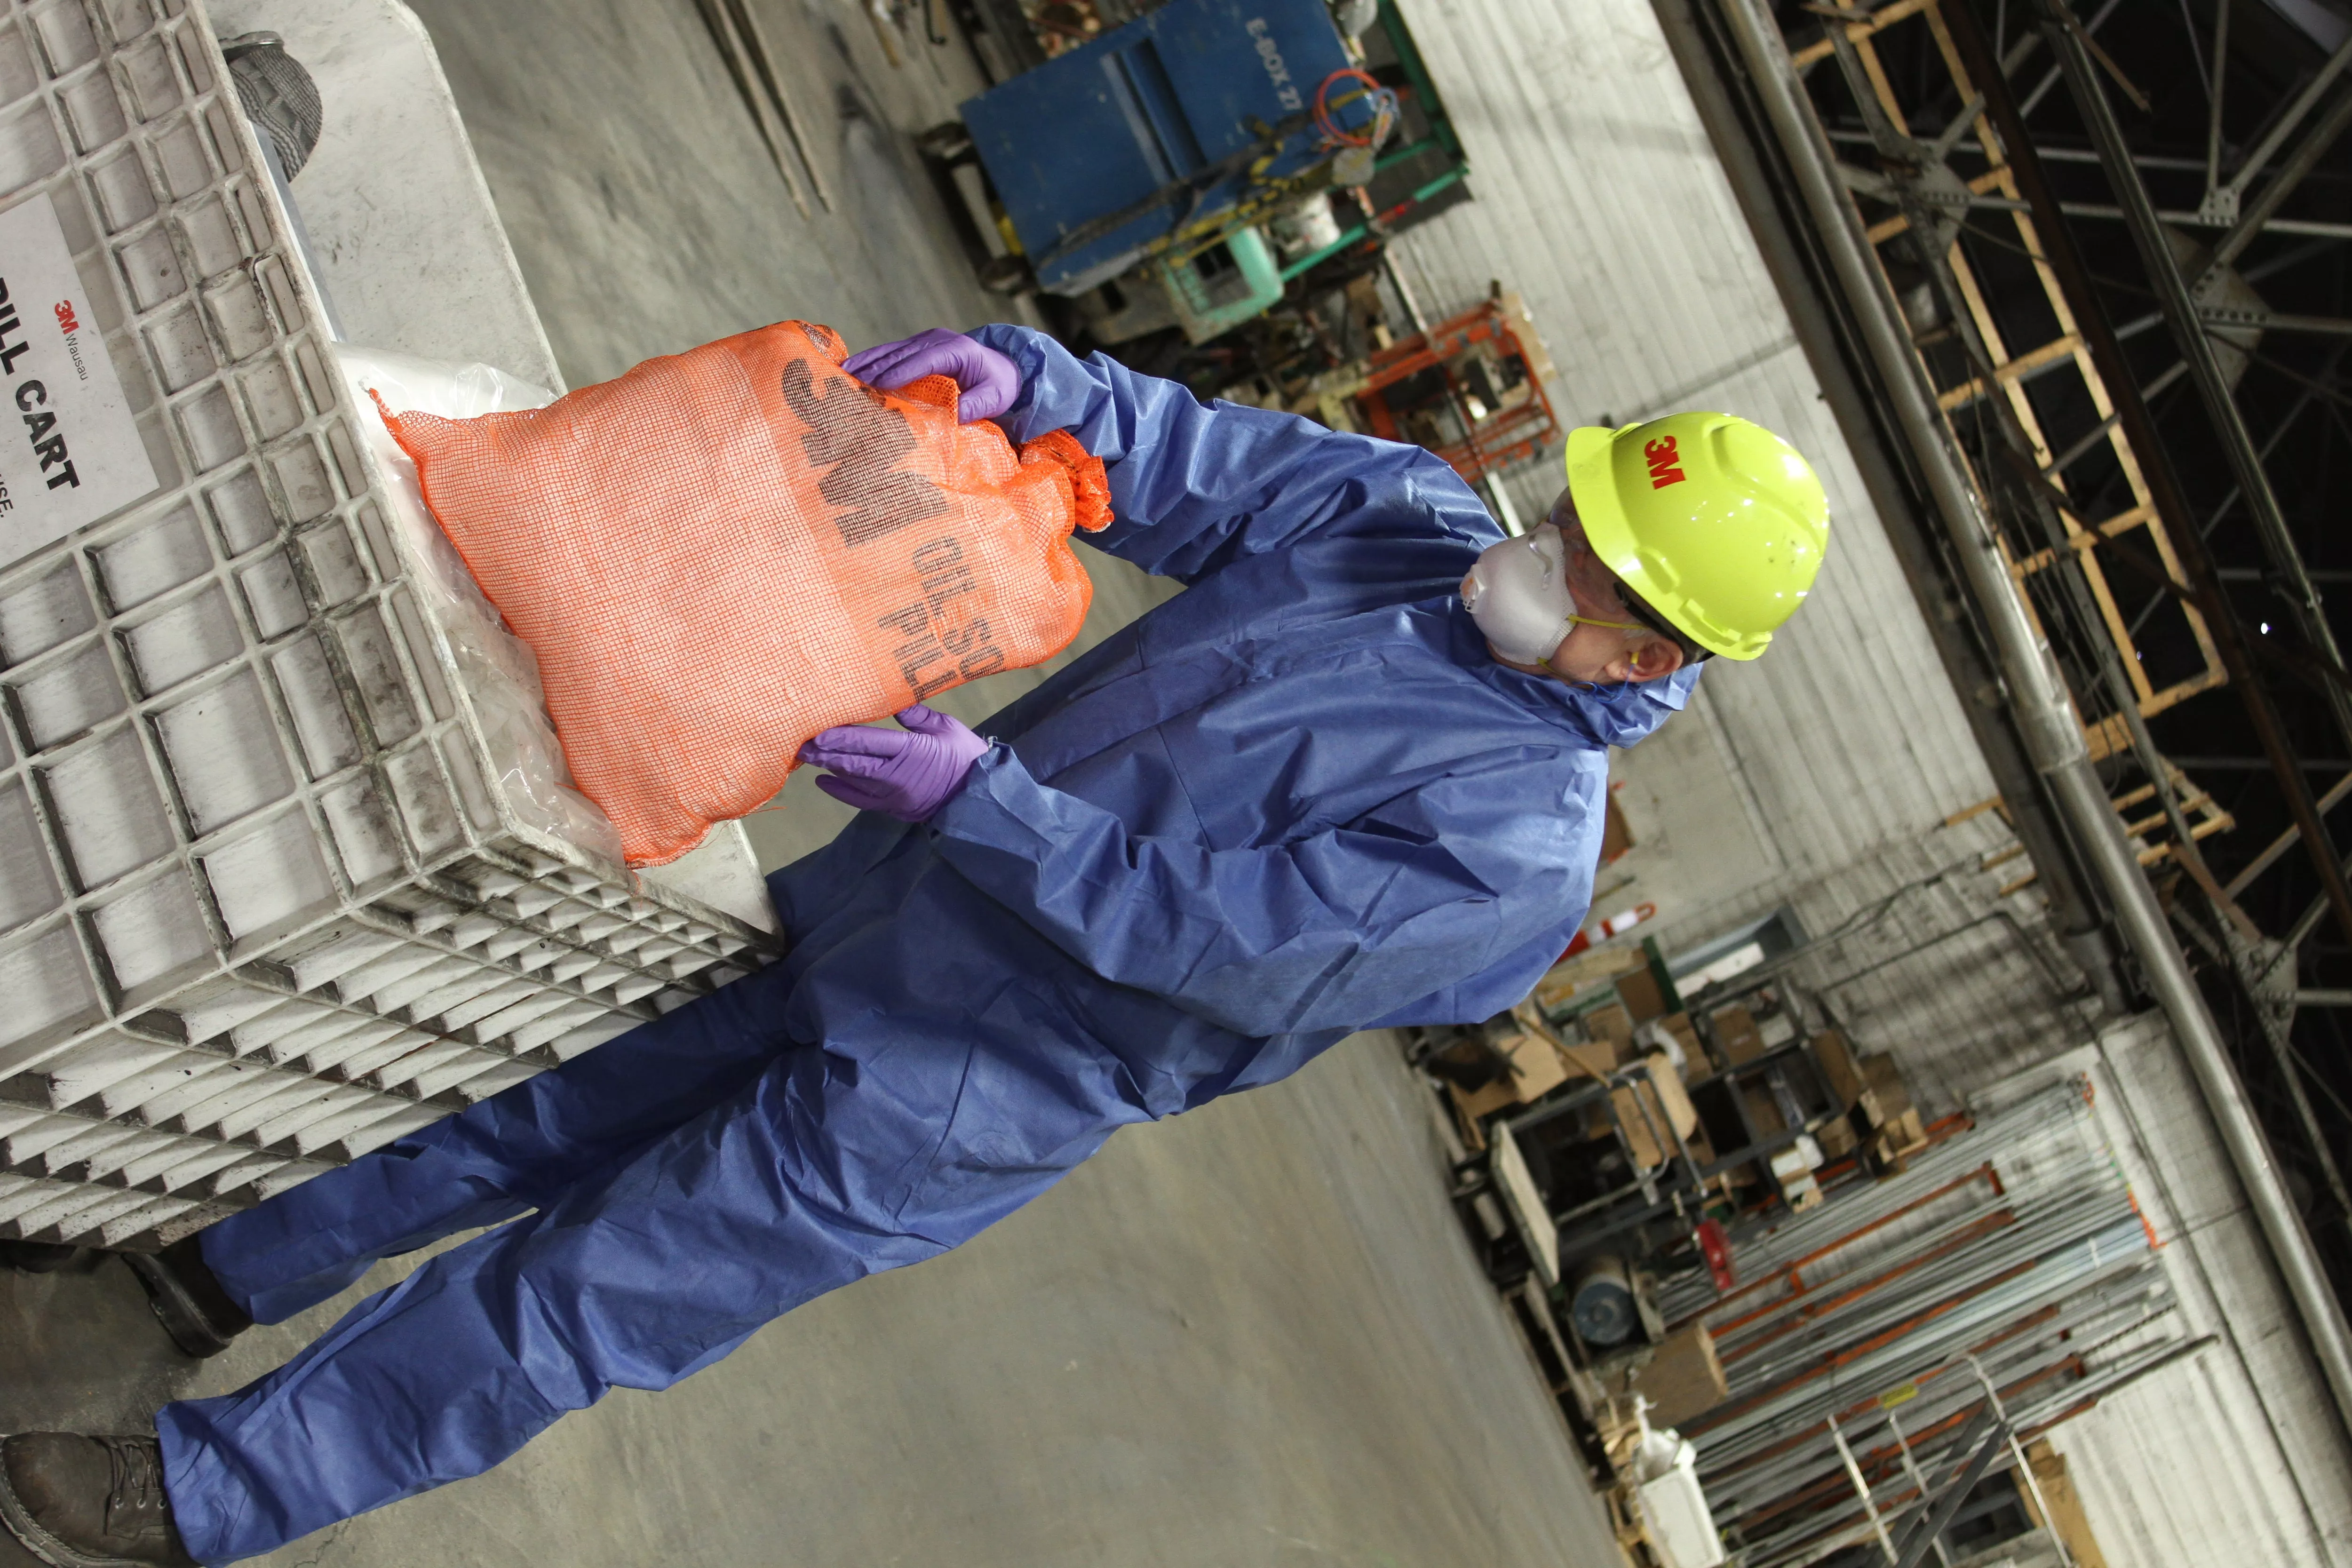 SKU 7000089619 | 3M™ Disposable Protective Coverall 4515